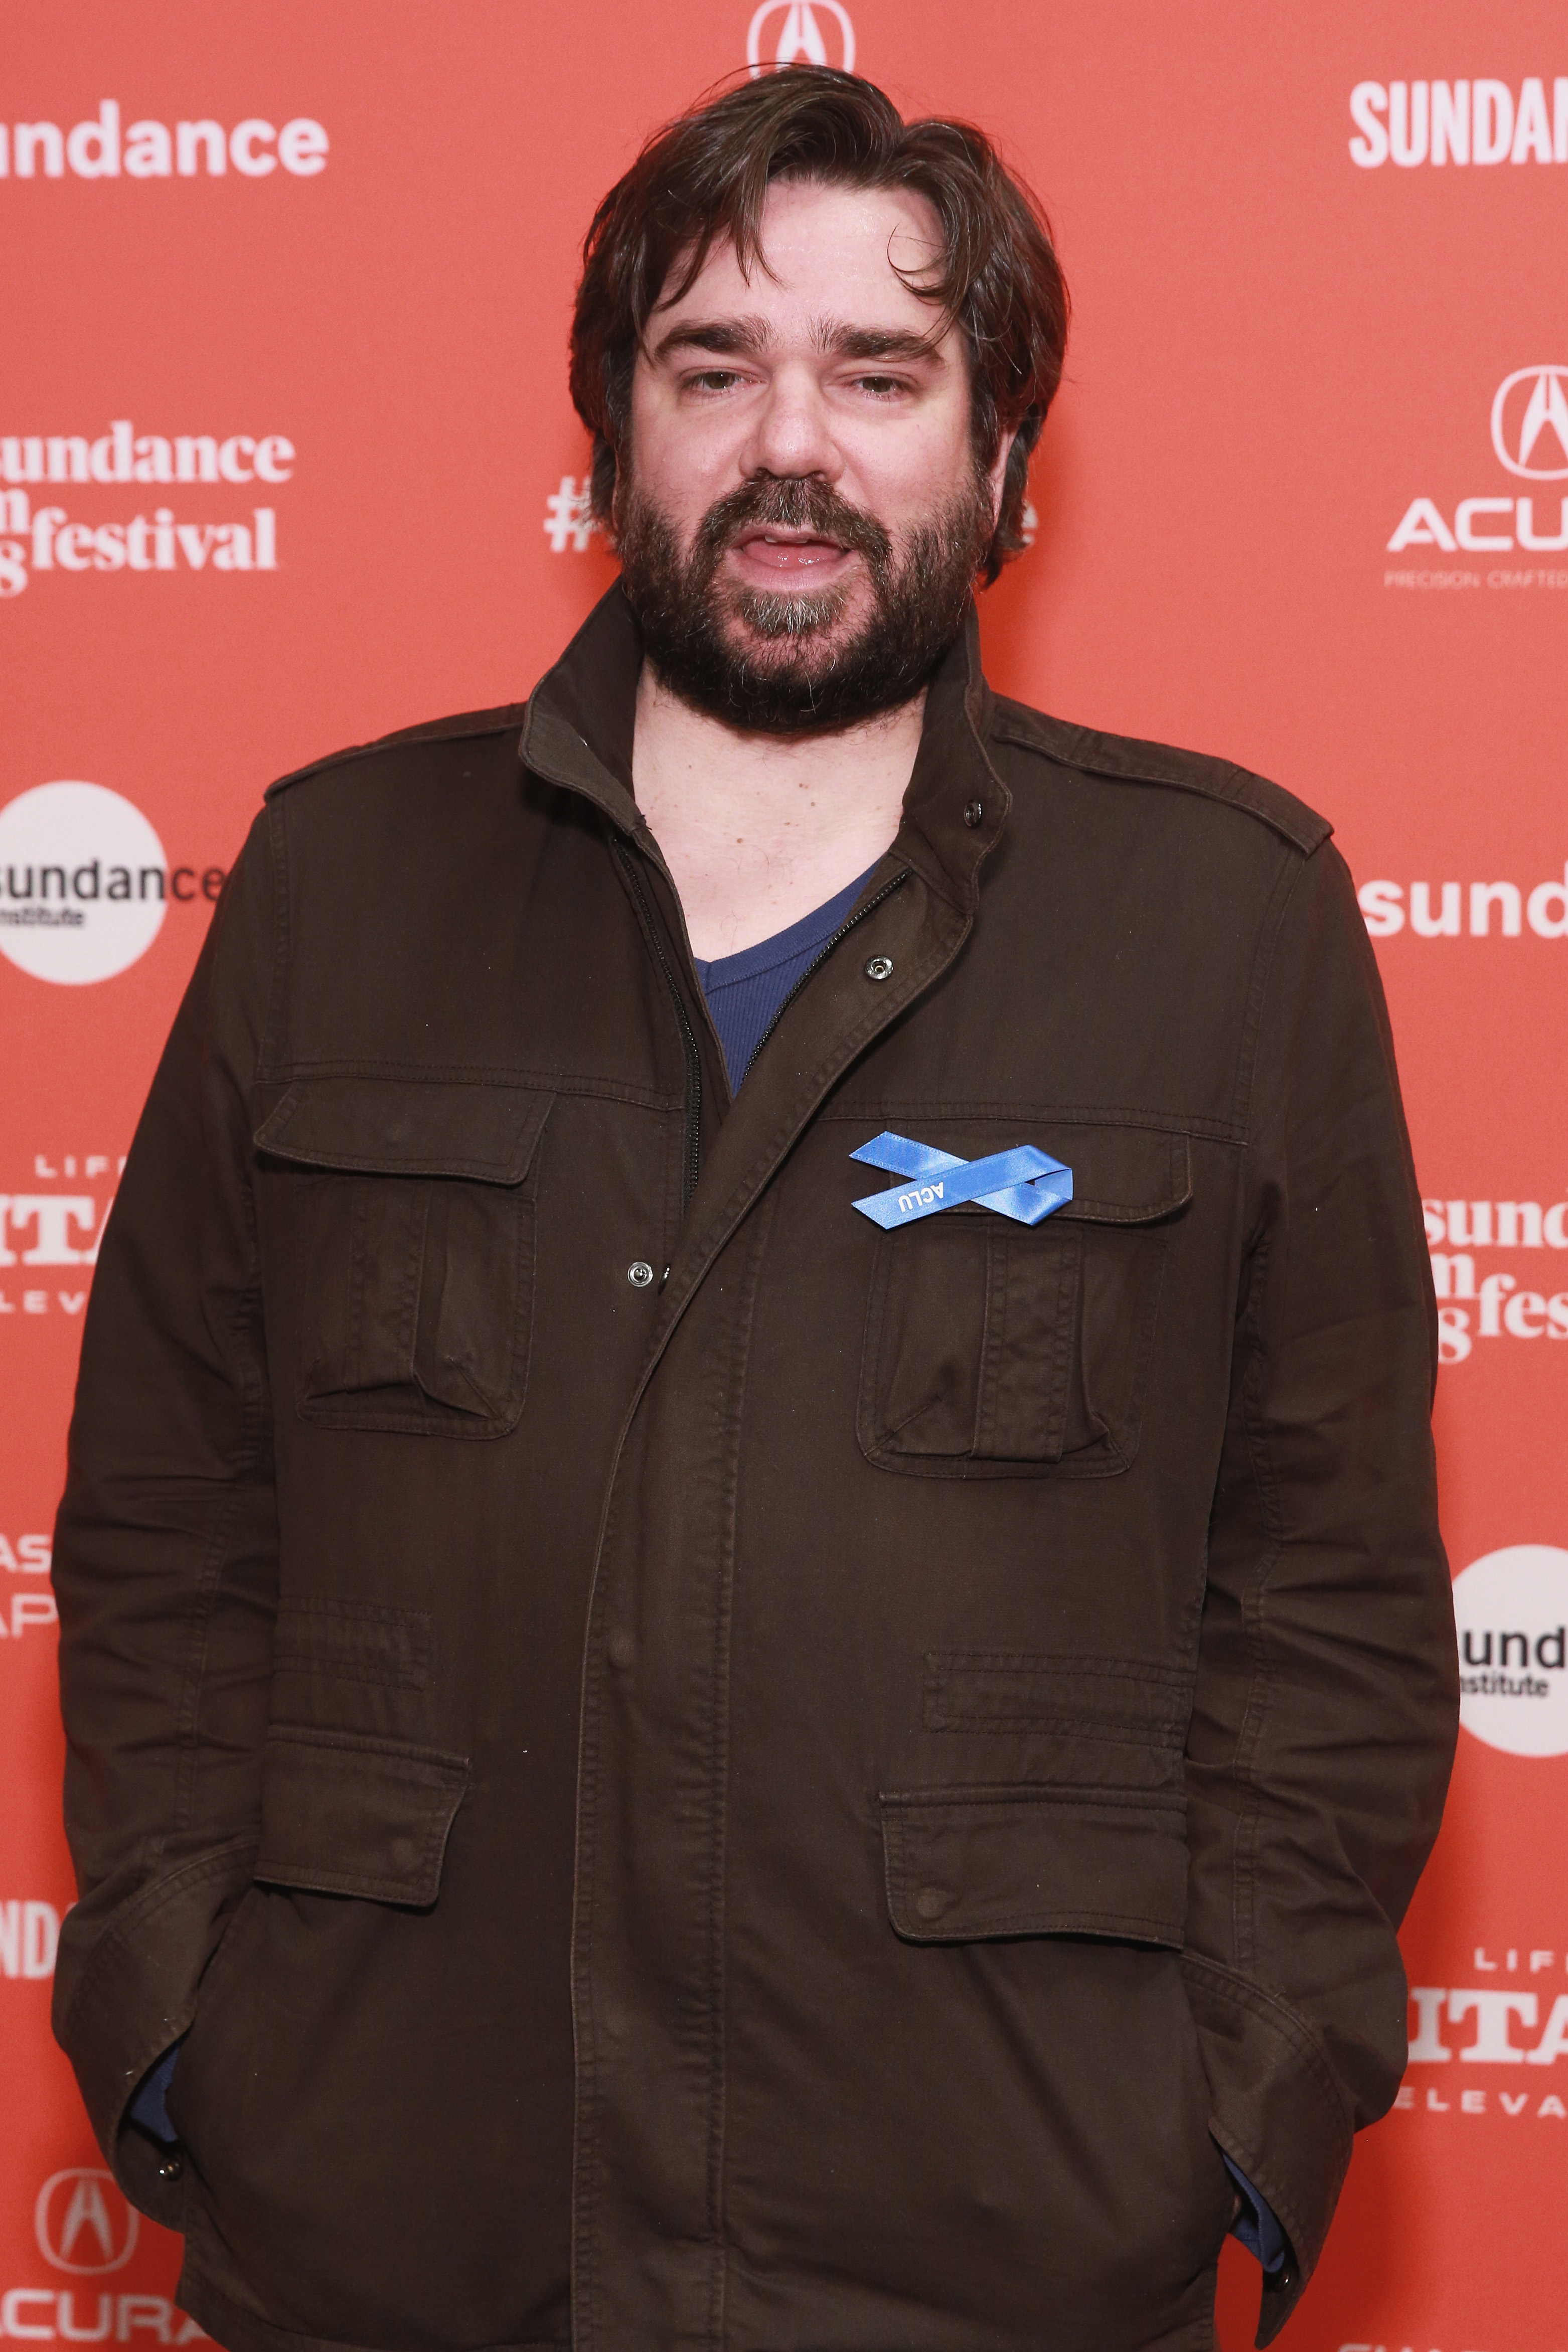 Matt Berry at the premiere of "An Evening With Beverly Luff Linn" during the 2018 Sundance Film Festival on January 20, 2018, in Park City, Utah. | Source: Getty Images